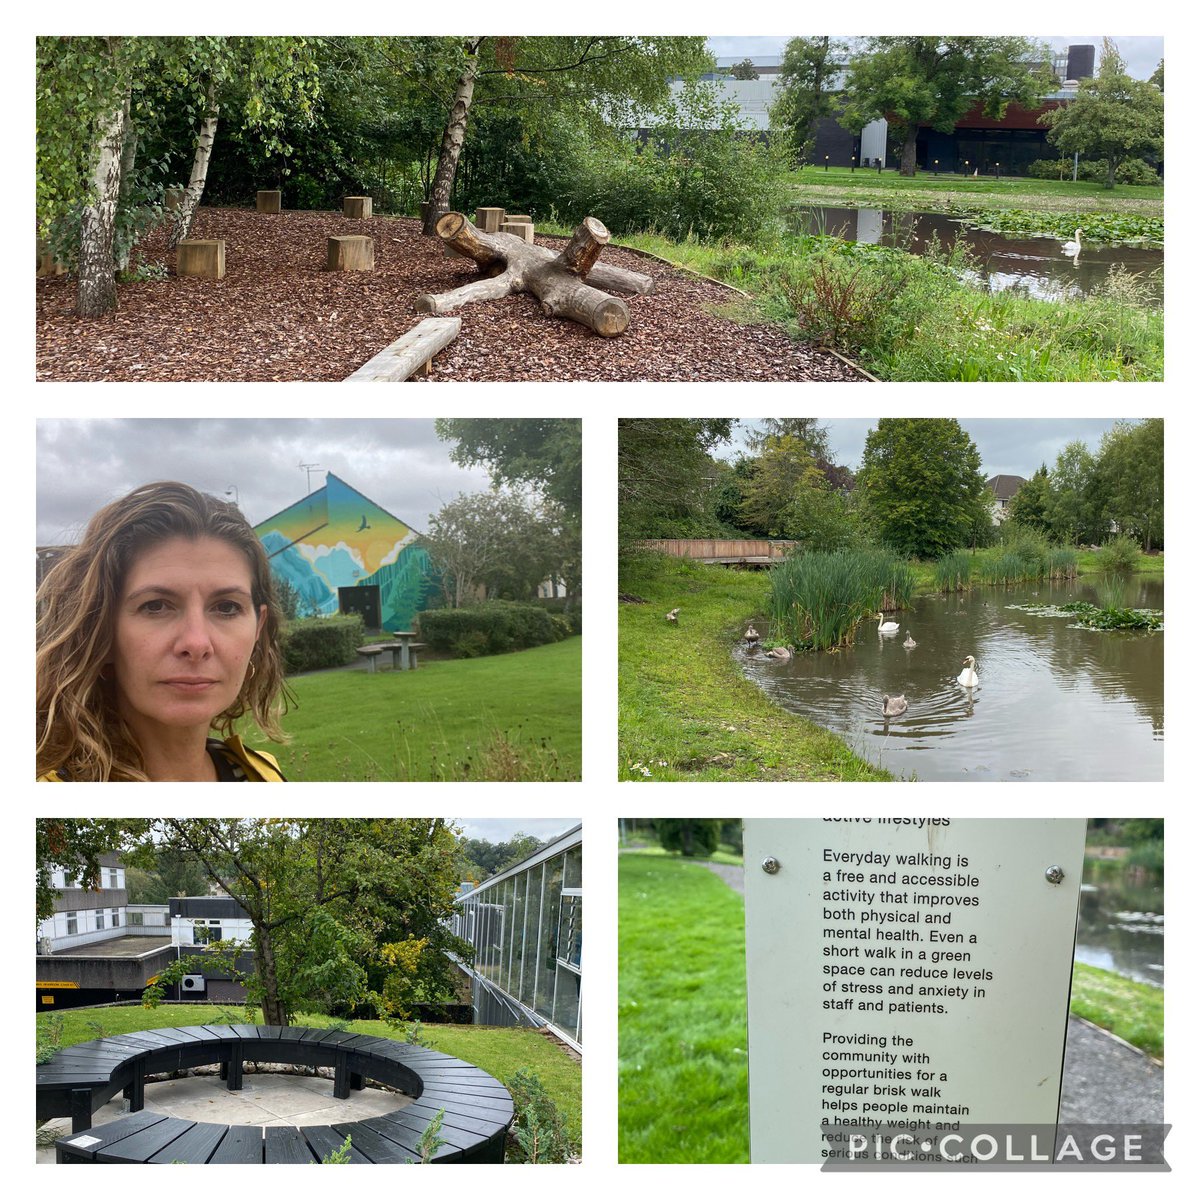 Great morning visiting @NHSGGC green spaces and talking about future potential #wellbeing #EverydayWalking #greenprescribing